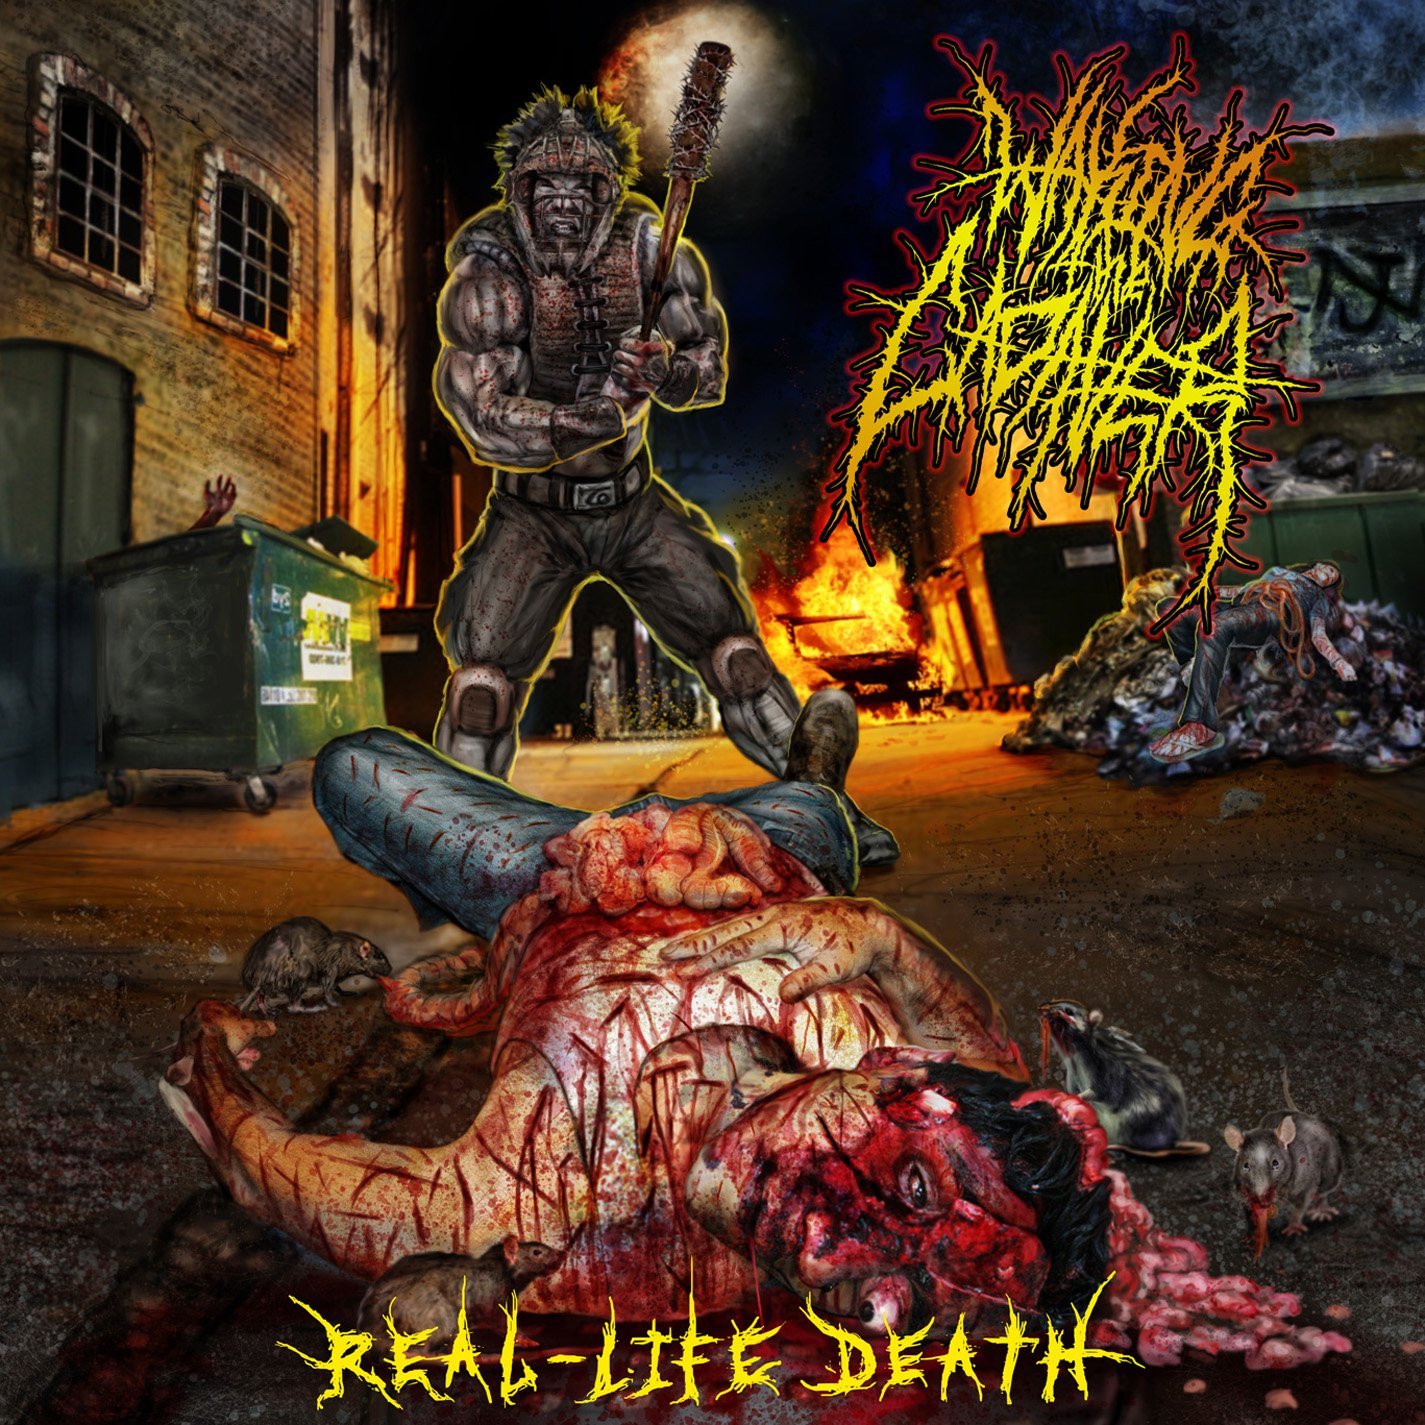 News Added Oct 05, 2013 Waking the Cadaver is an American Deathcore band from Shore Points, New Jersey and they formed in January 2006. Their original name was Death to Honor Submitted By getmetal Track list: Added Oct 05, 2013 01. Insult To Injury (4:03) 02. Money Power Death (3:29) 03. Business As Usual (3:56) […]